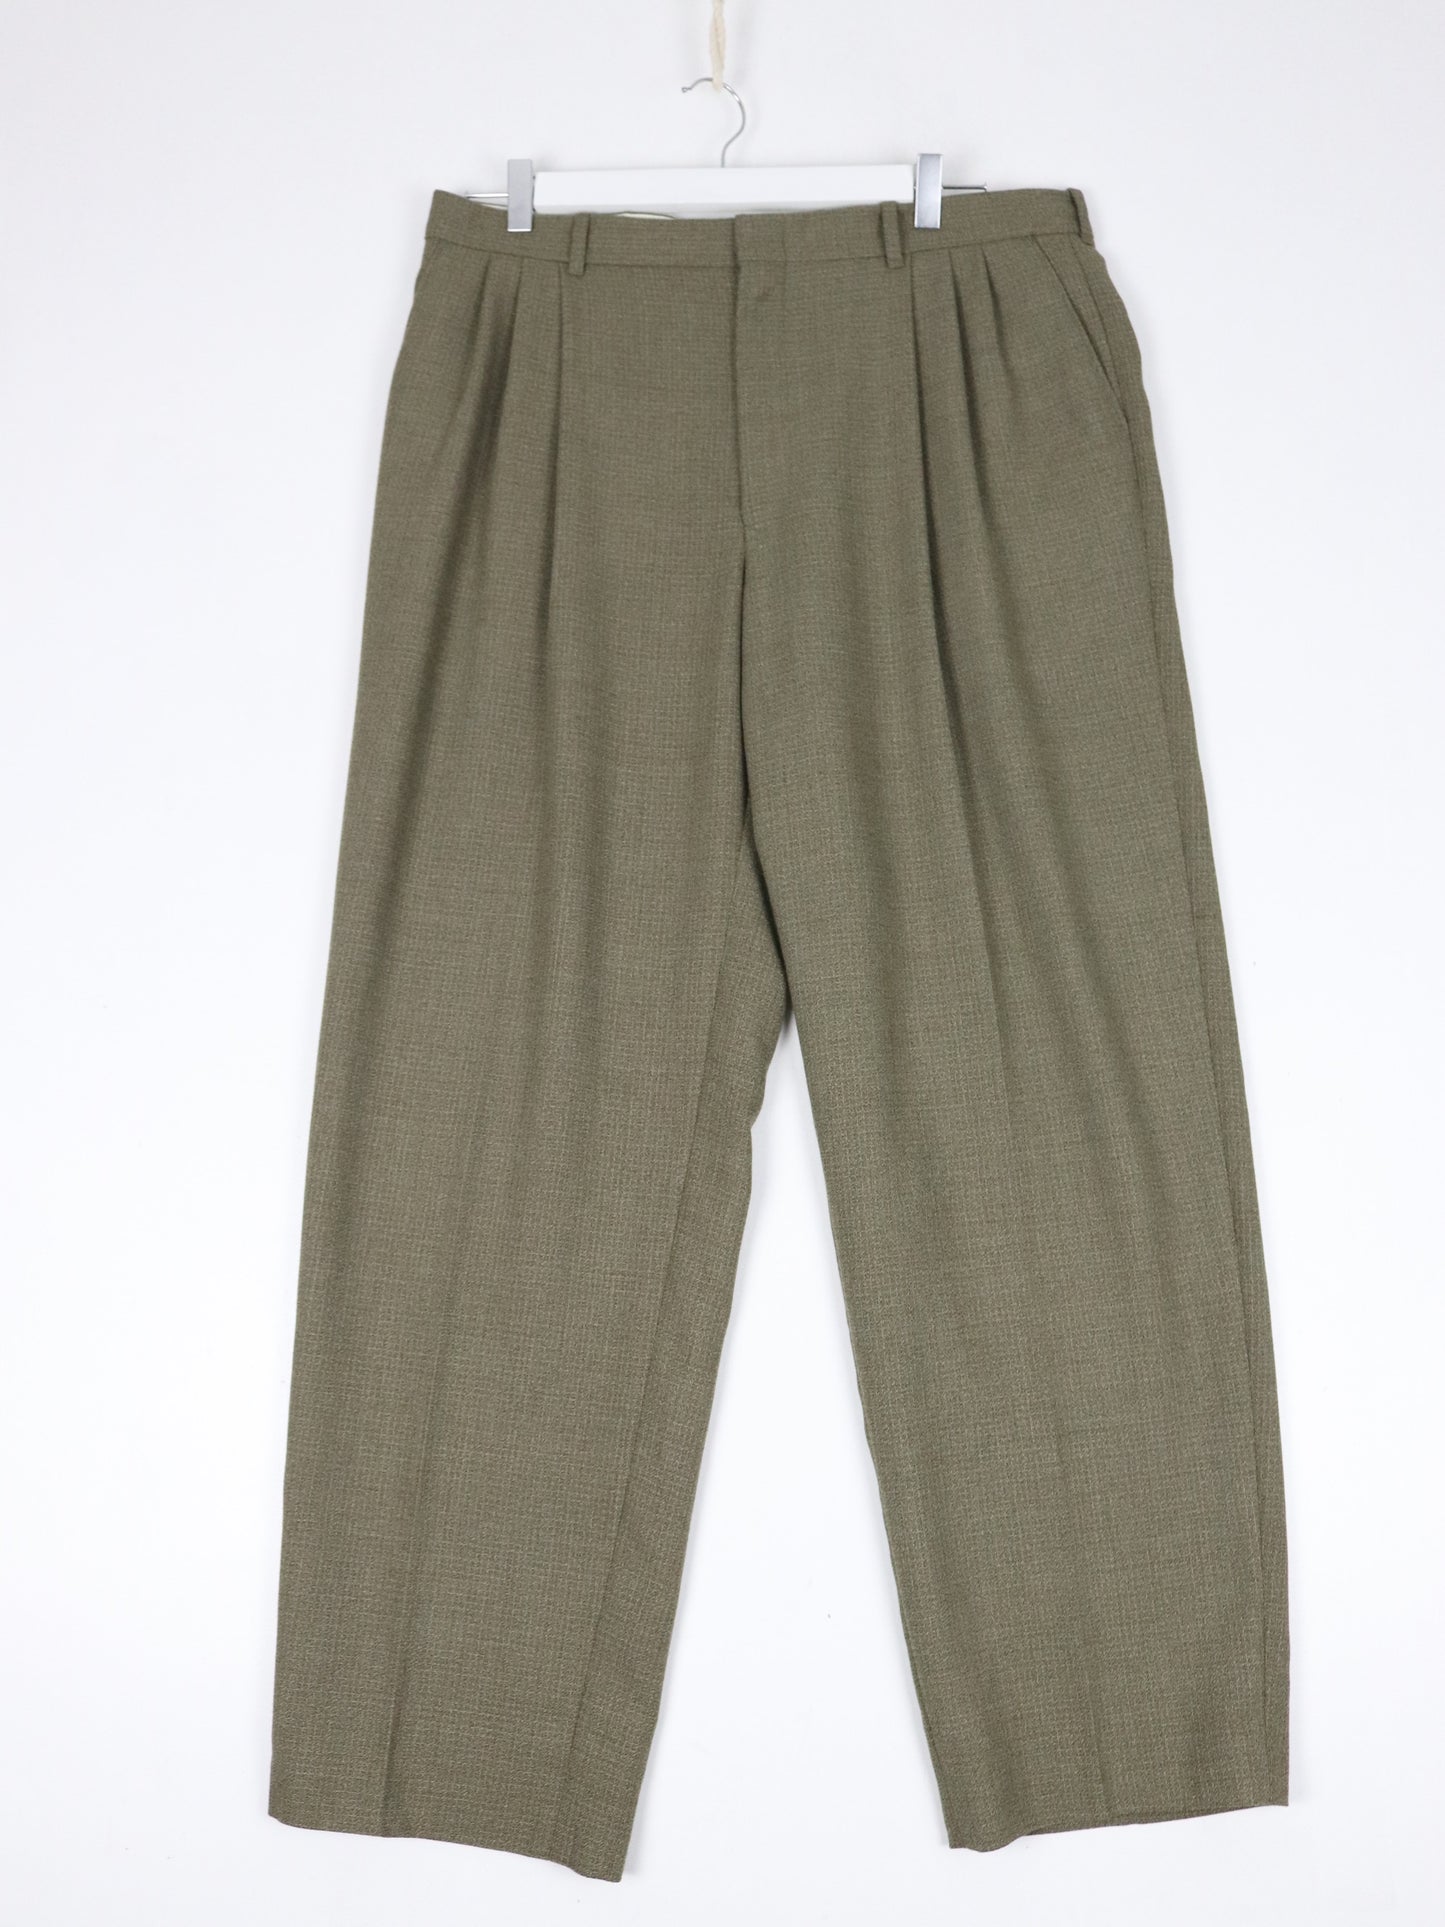 Vintage Charter Collection Pants Mens 35 x 30 Green Wool Blend Trousers